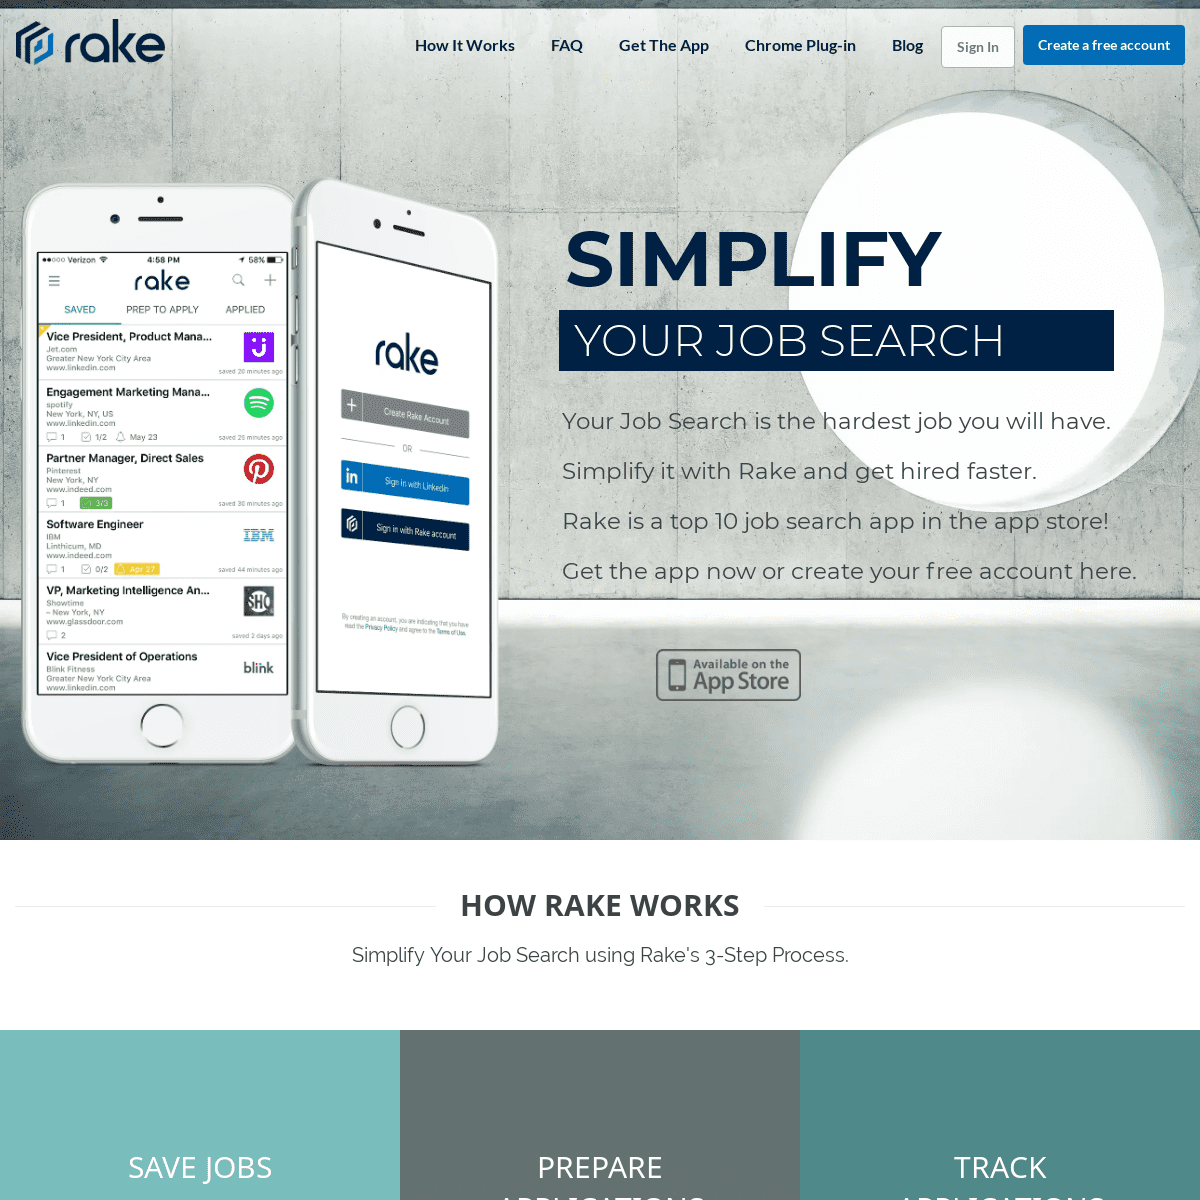 Rake - Job Search Simplified. Save jobs for later, apply when ready.